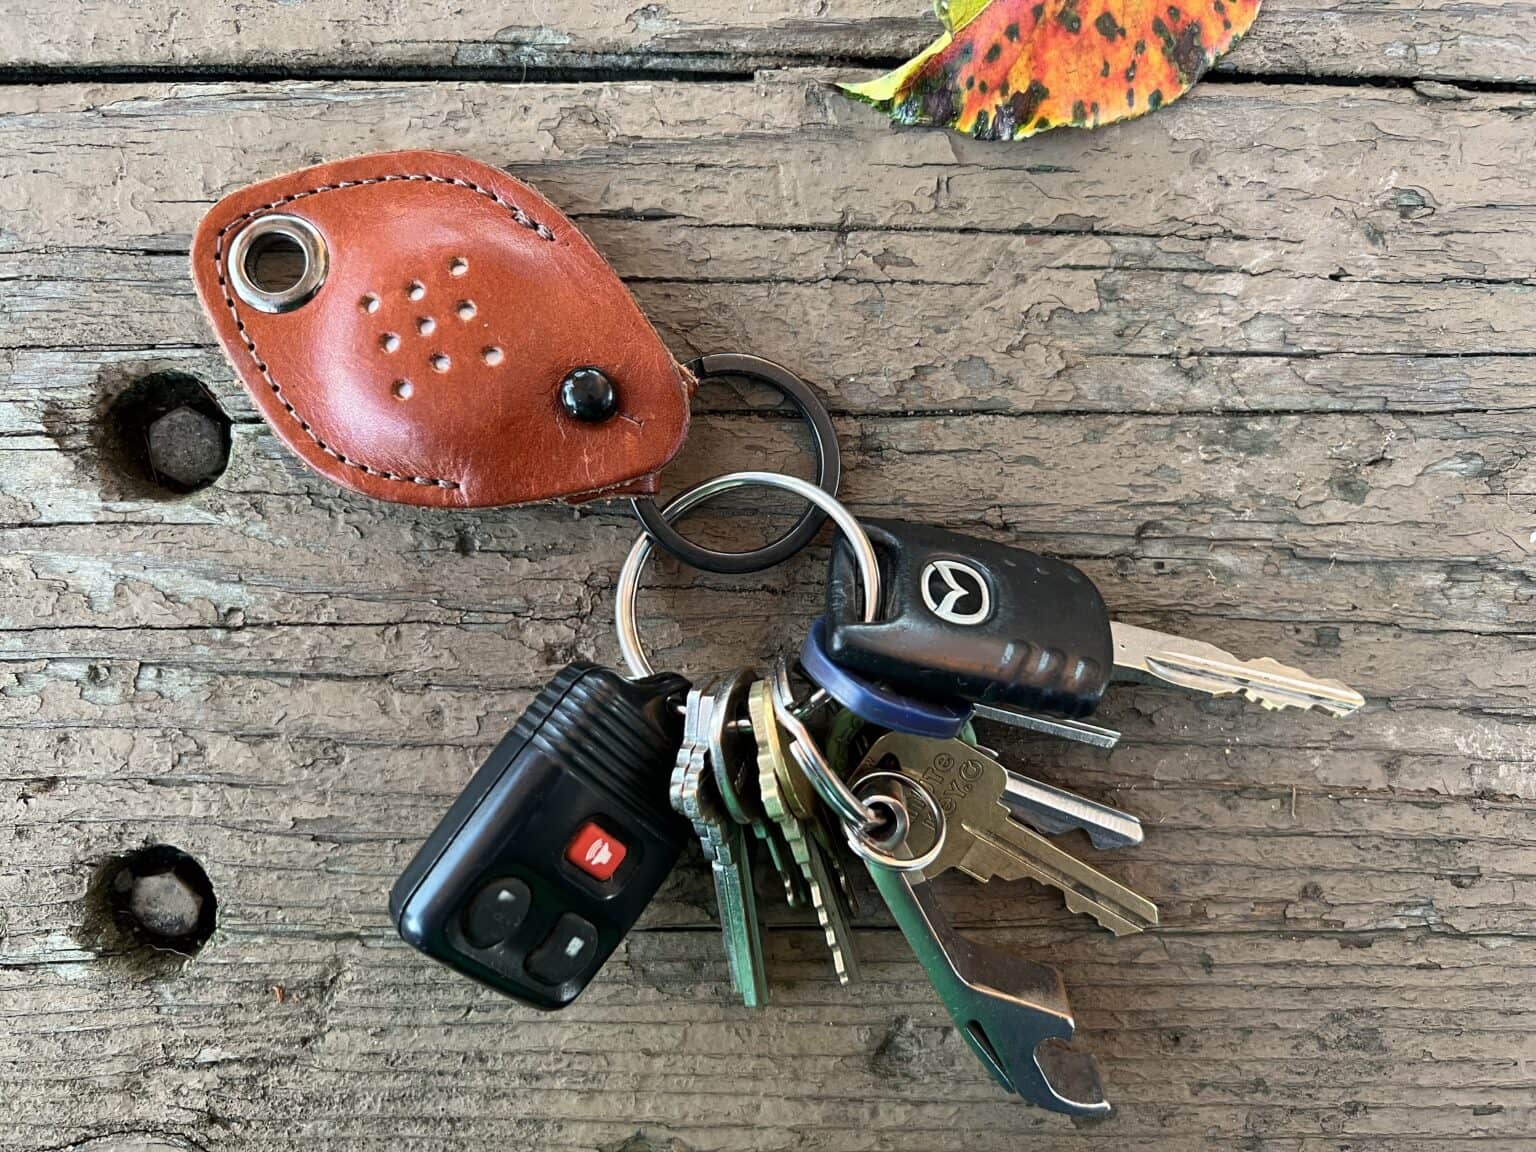  This keychain can handle a clutch of keys.